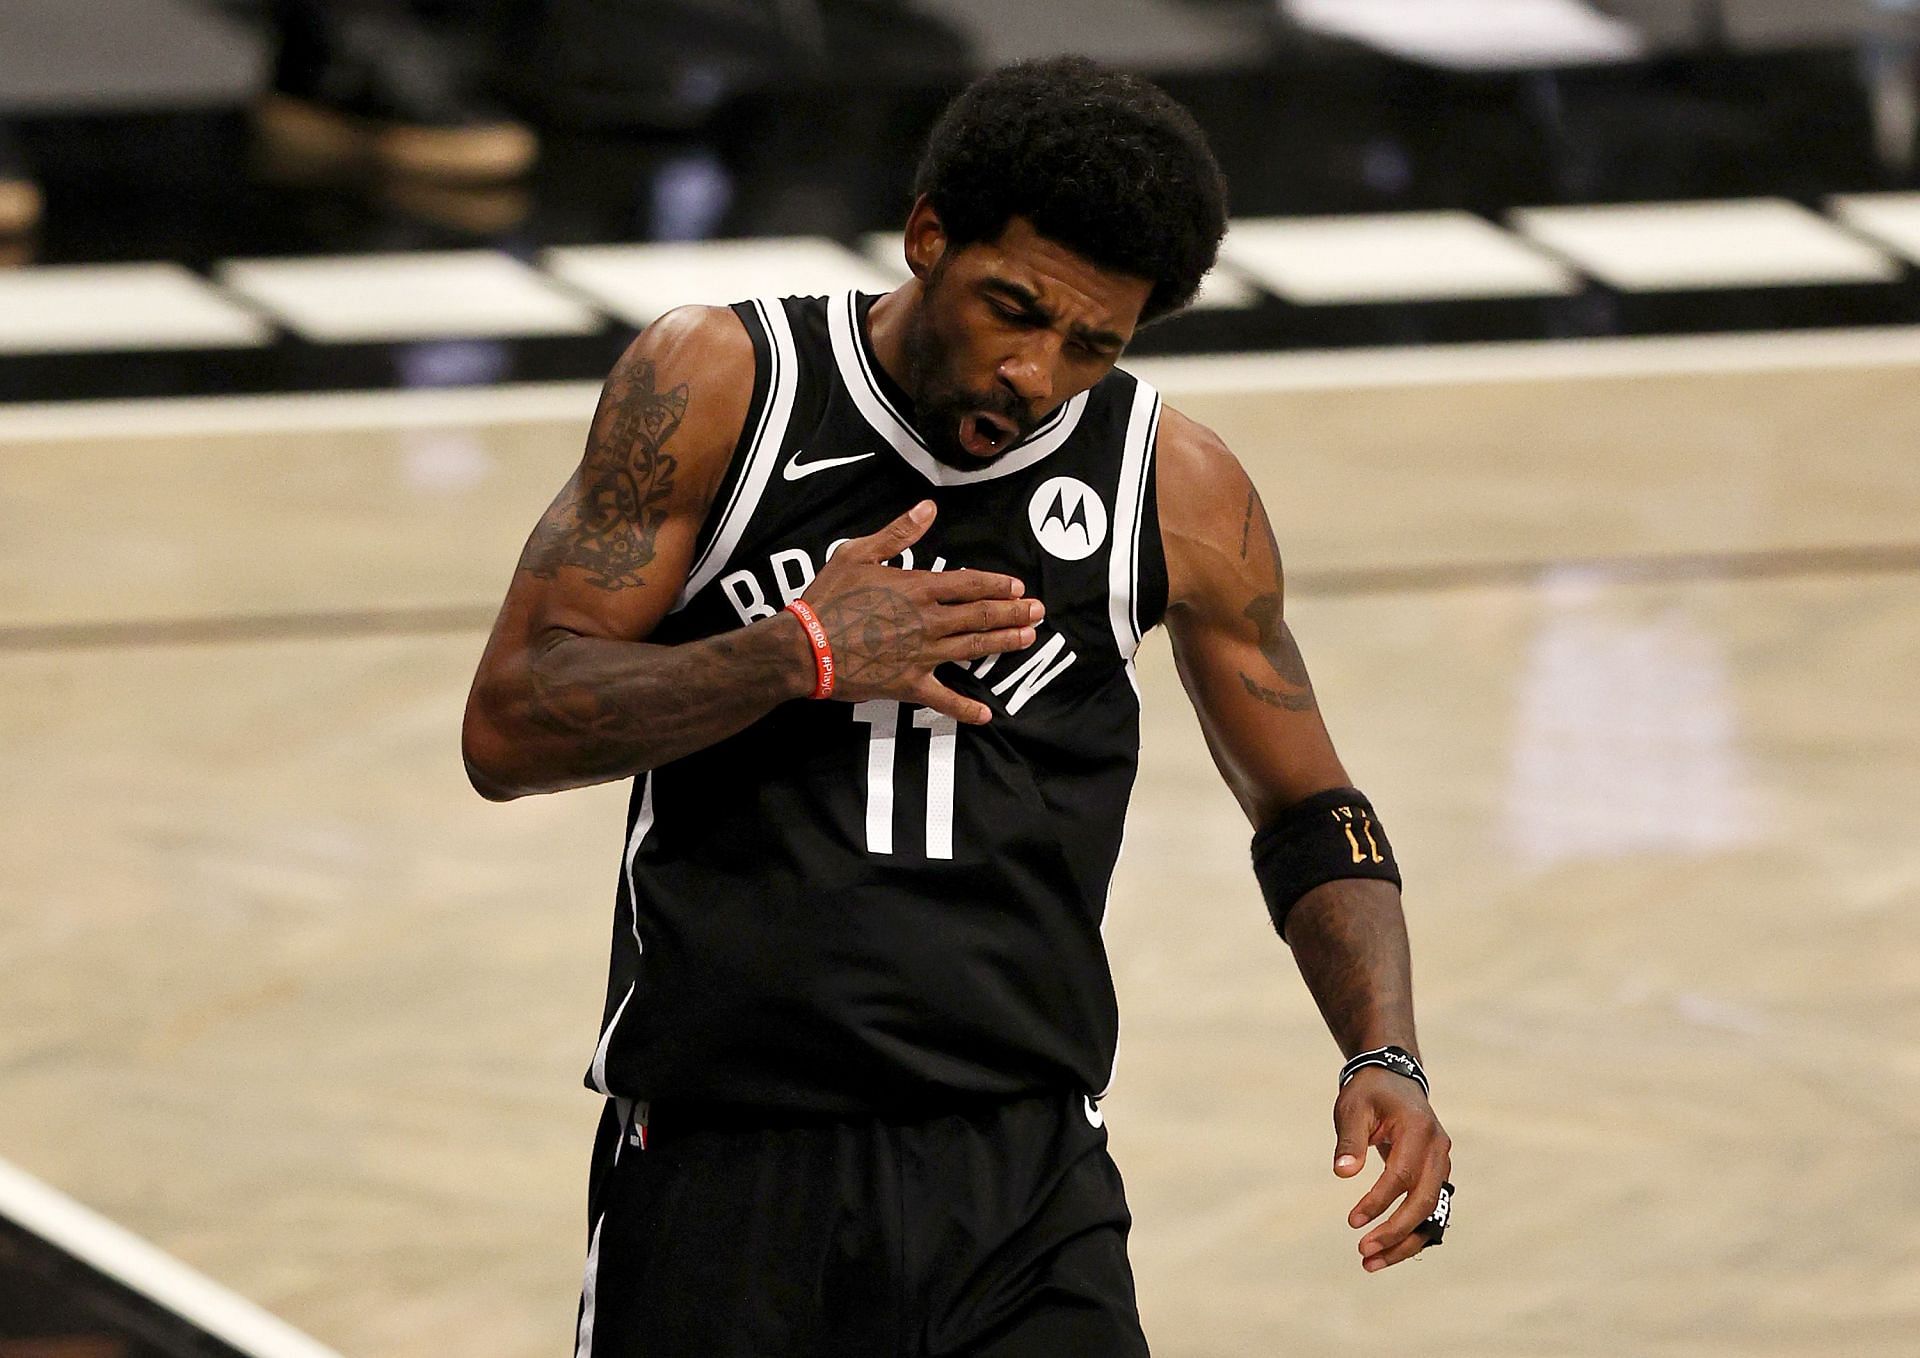 Kyrie Irving is a 7-time NBA All-Star